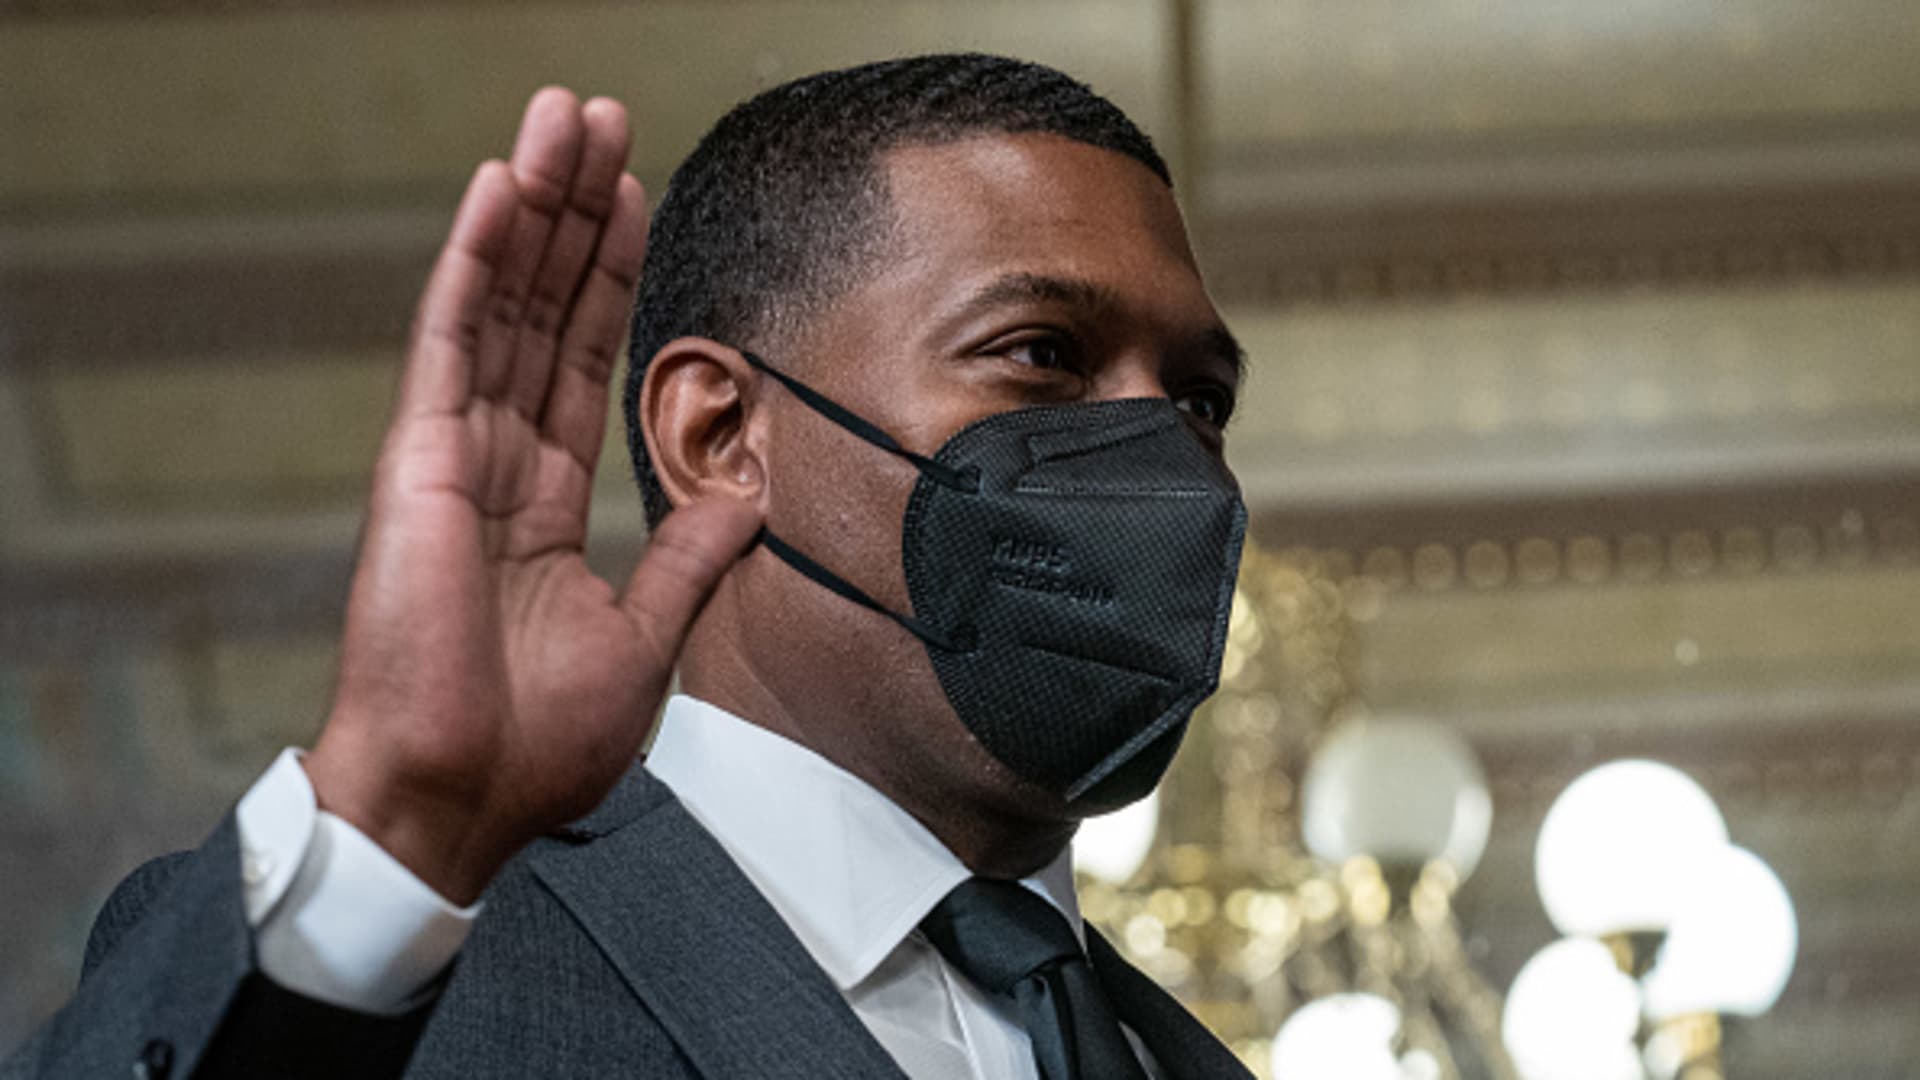 Michael Regan, administrator of the Environmental Protection Agency (EPA), wears a protective mask while being sworn in during a ceremony in Washington, D.C., on Wednesday, March 17, 2021.